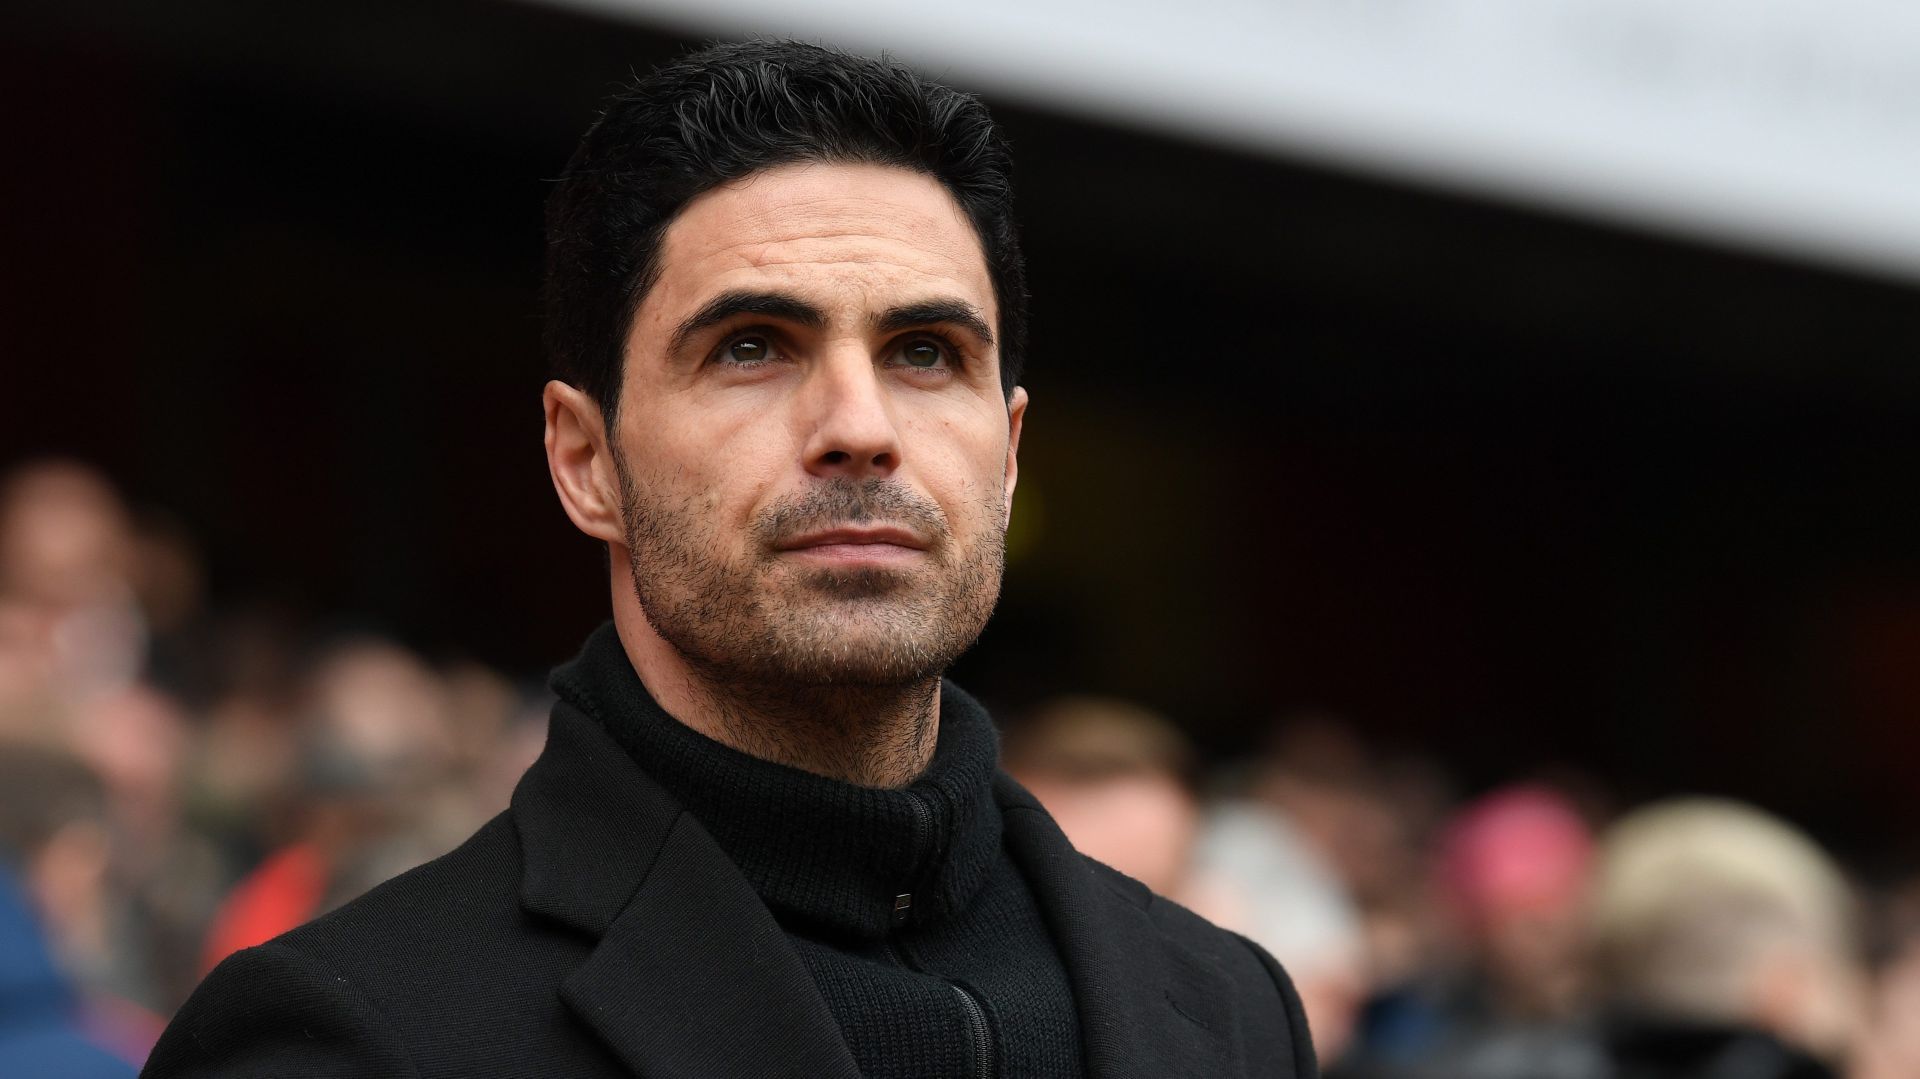 Mikel Arteta - former player and current manager for Arsenal